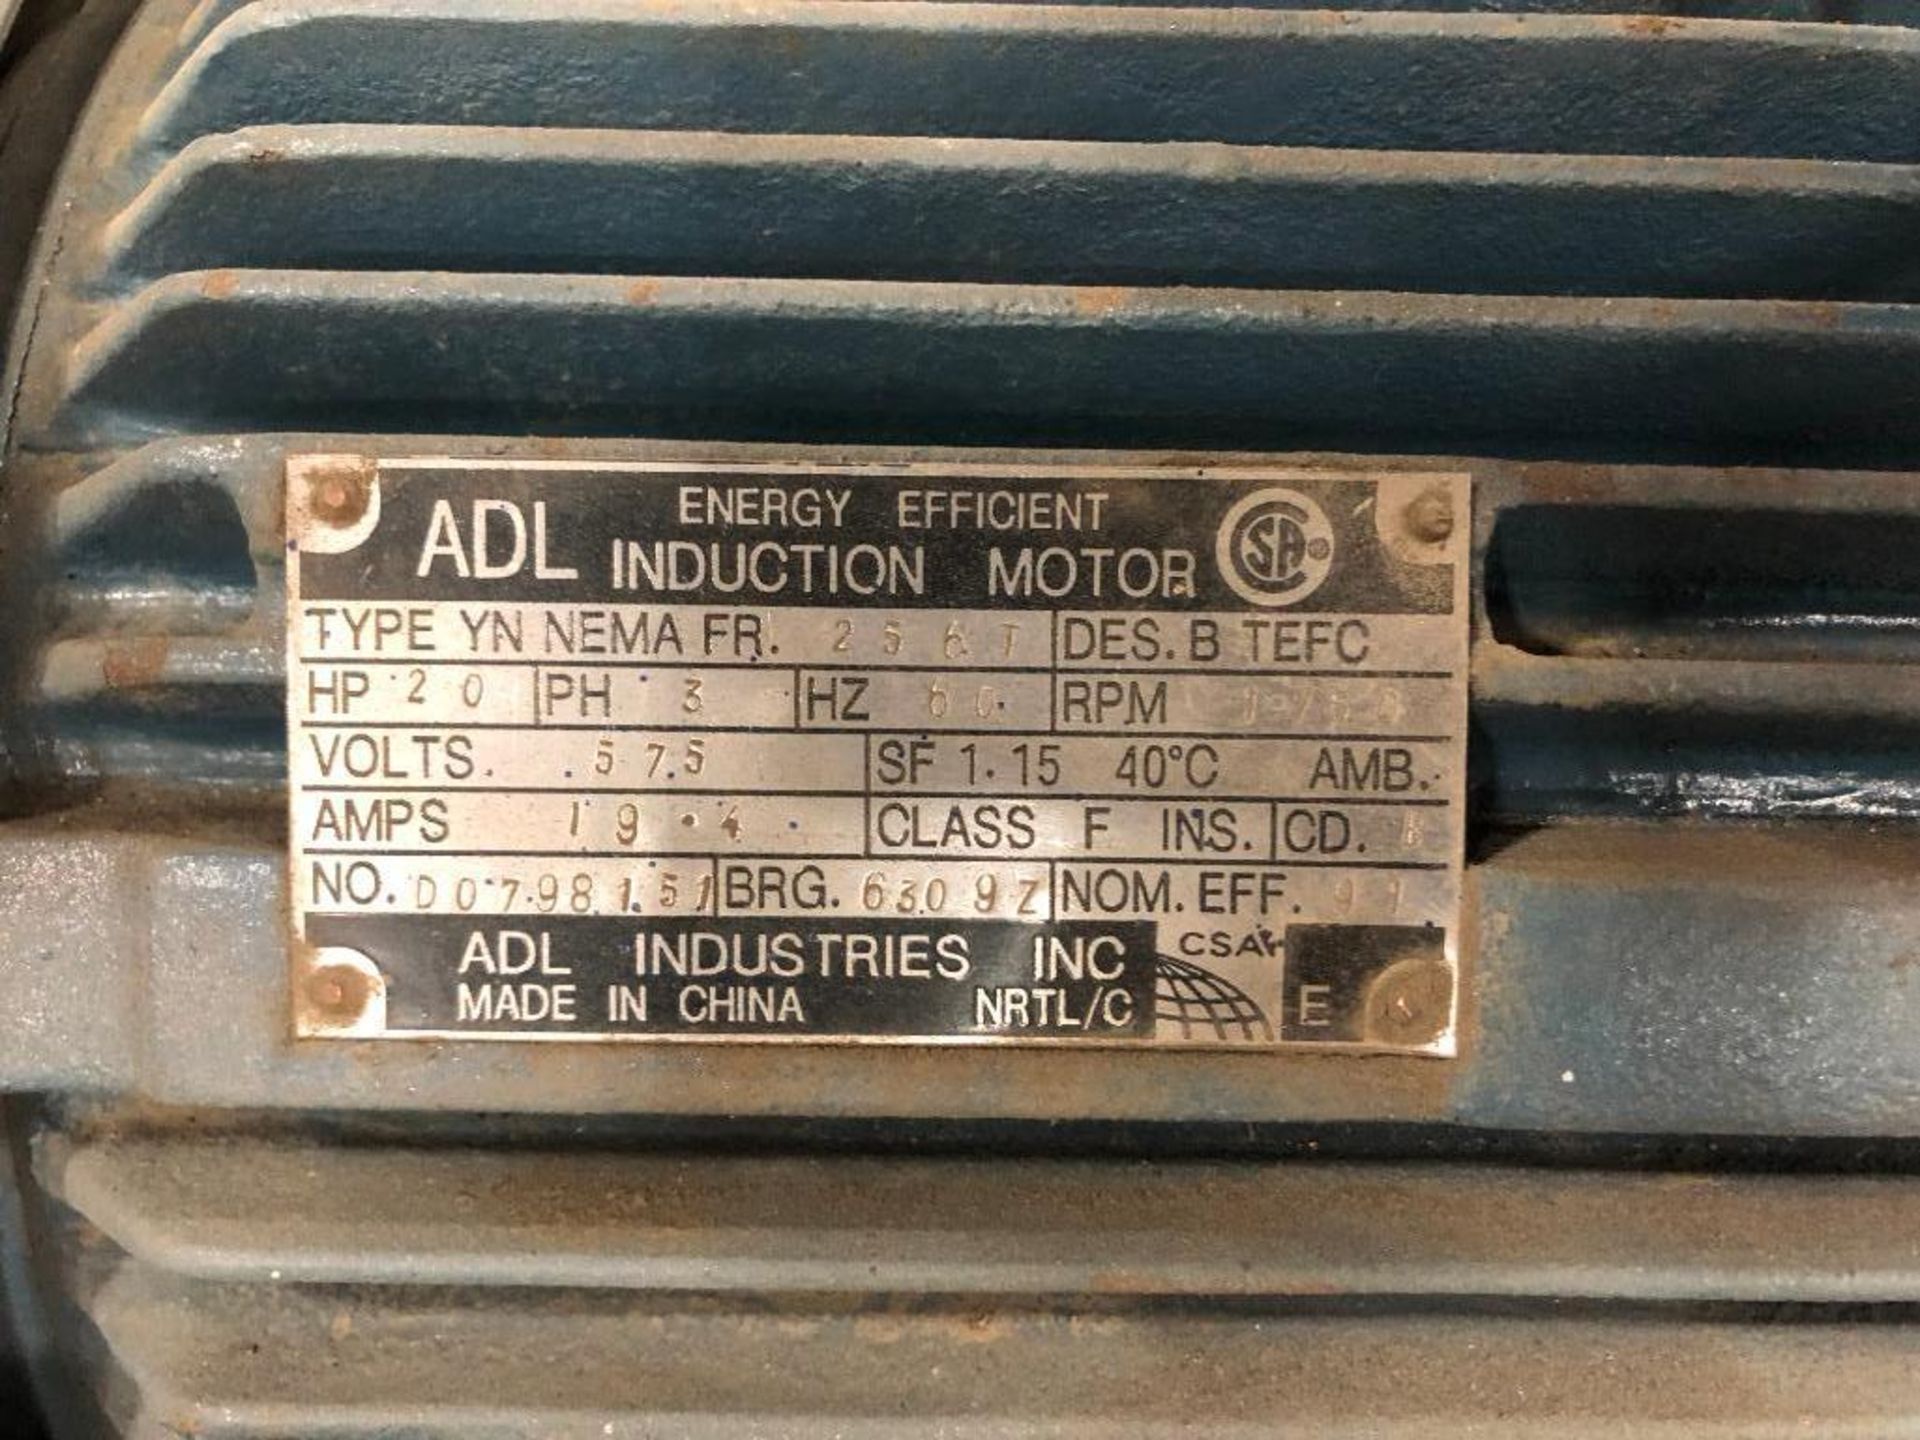 ADL Energy Efficient Induction Motor - Image 2 of 2